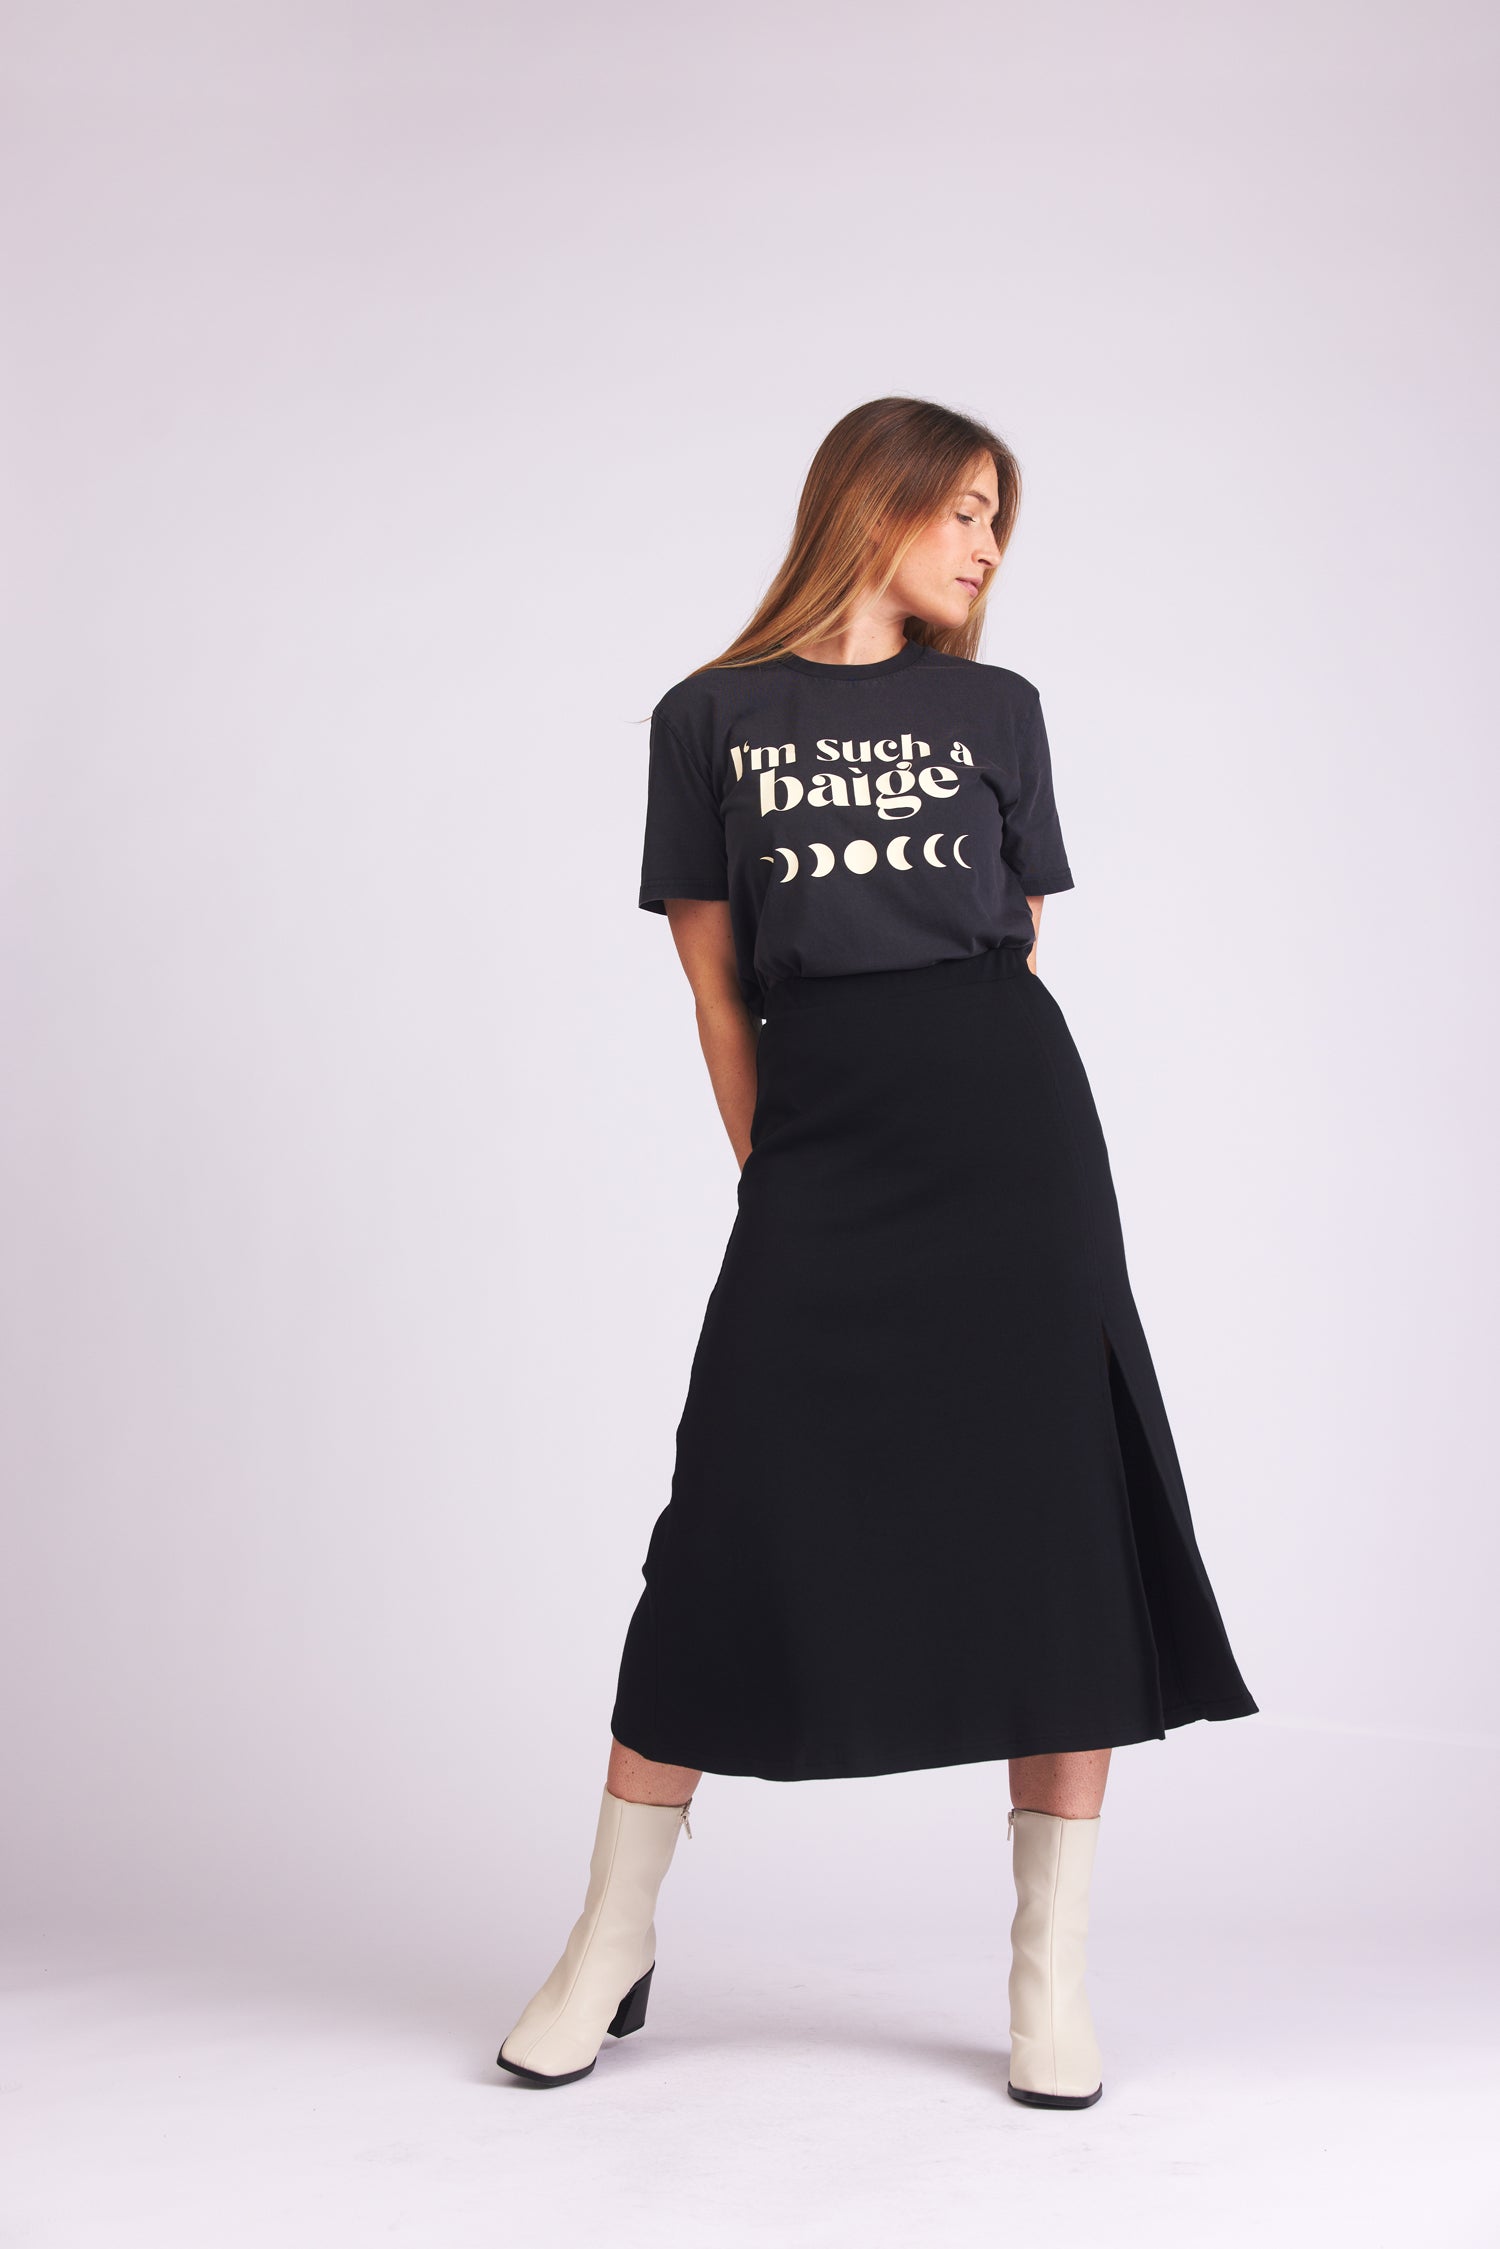 Black T-shirt Such a baige made from 100% organic cotton by Baige the Label